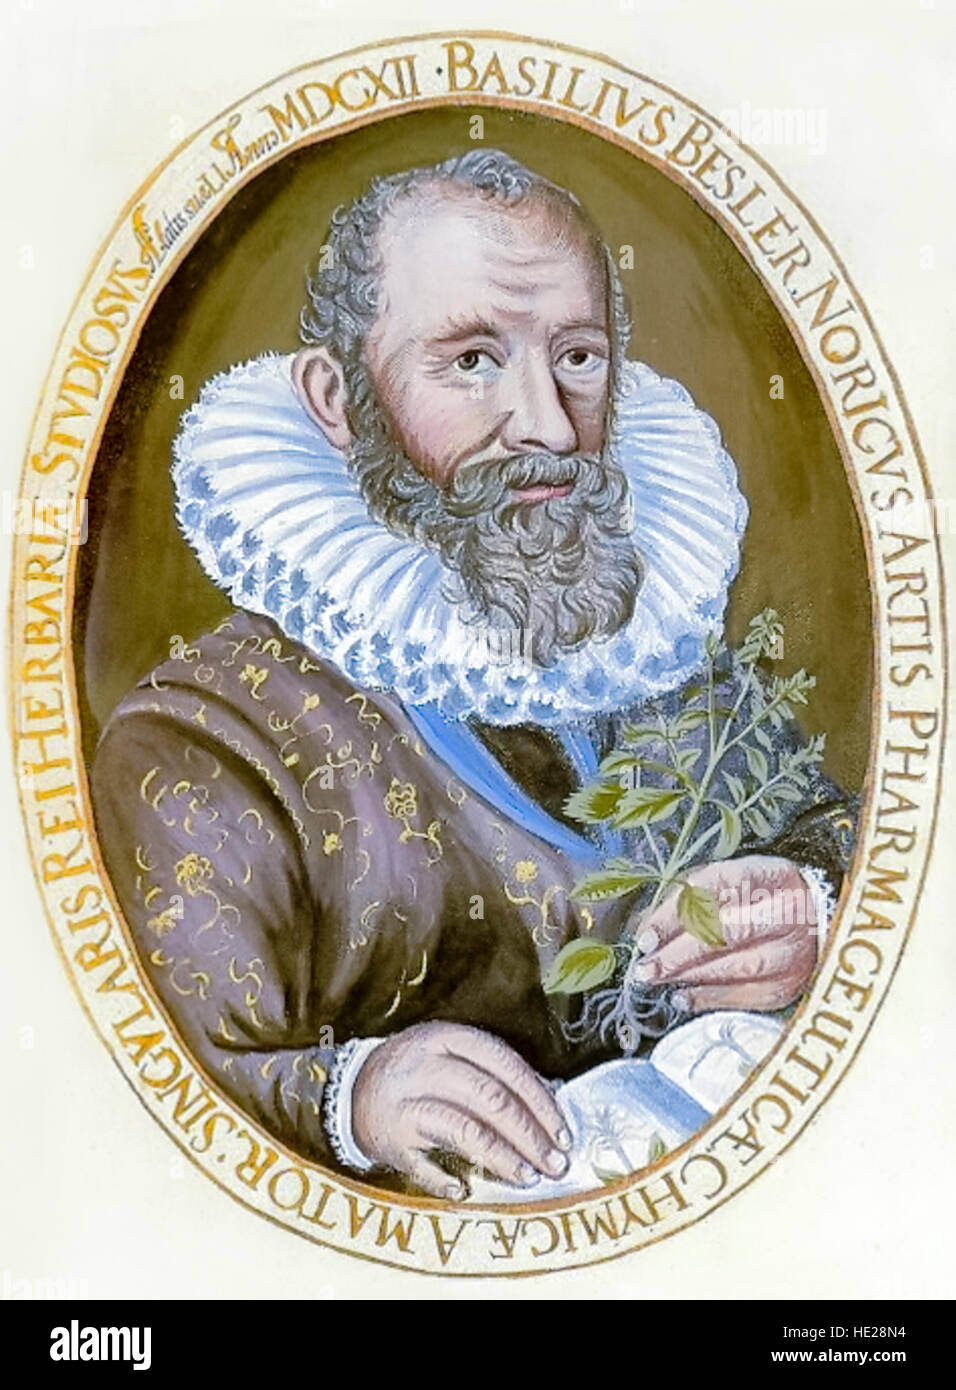 Hand colored portrait of Basilius Besler (1561–1629) Nuremberg apothecary and botanist who published Hortus Eystettensis in 1613. Stock Photo